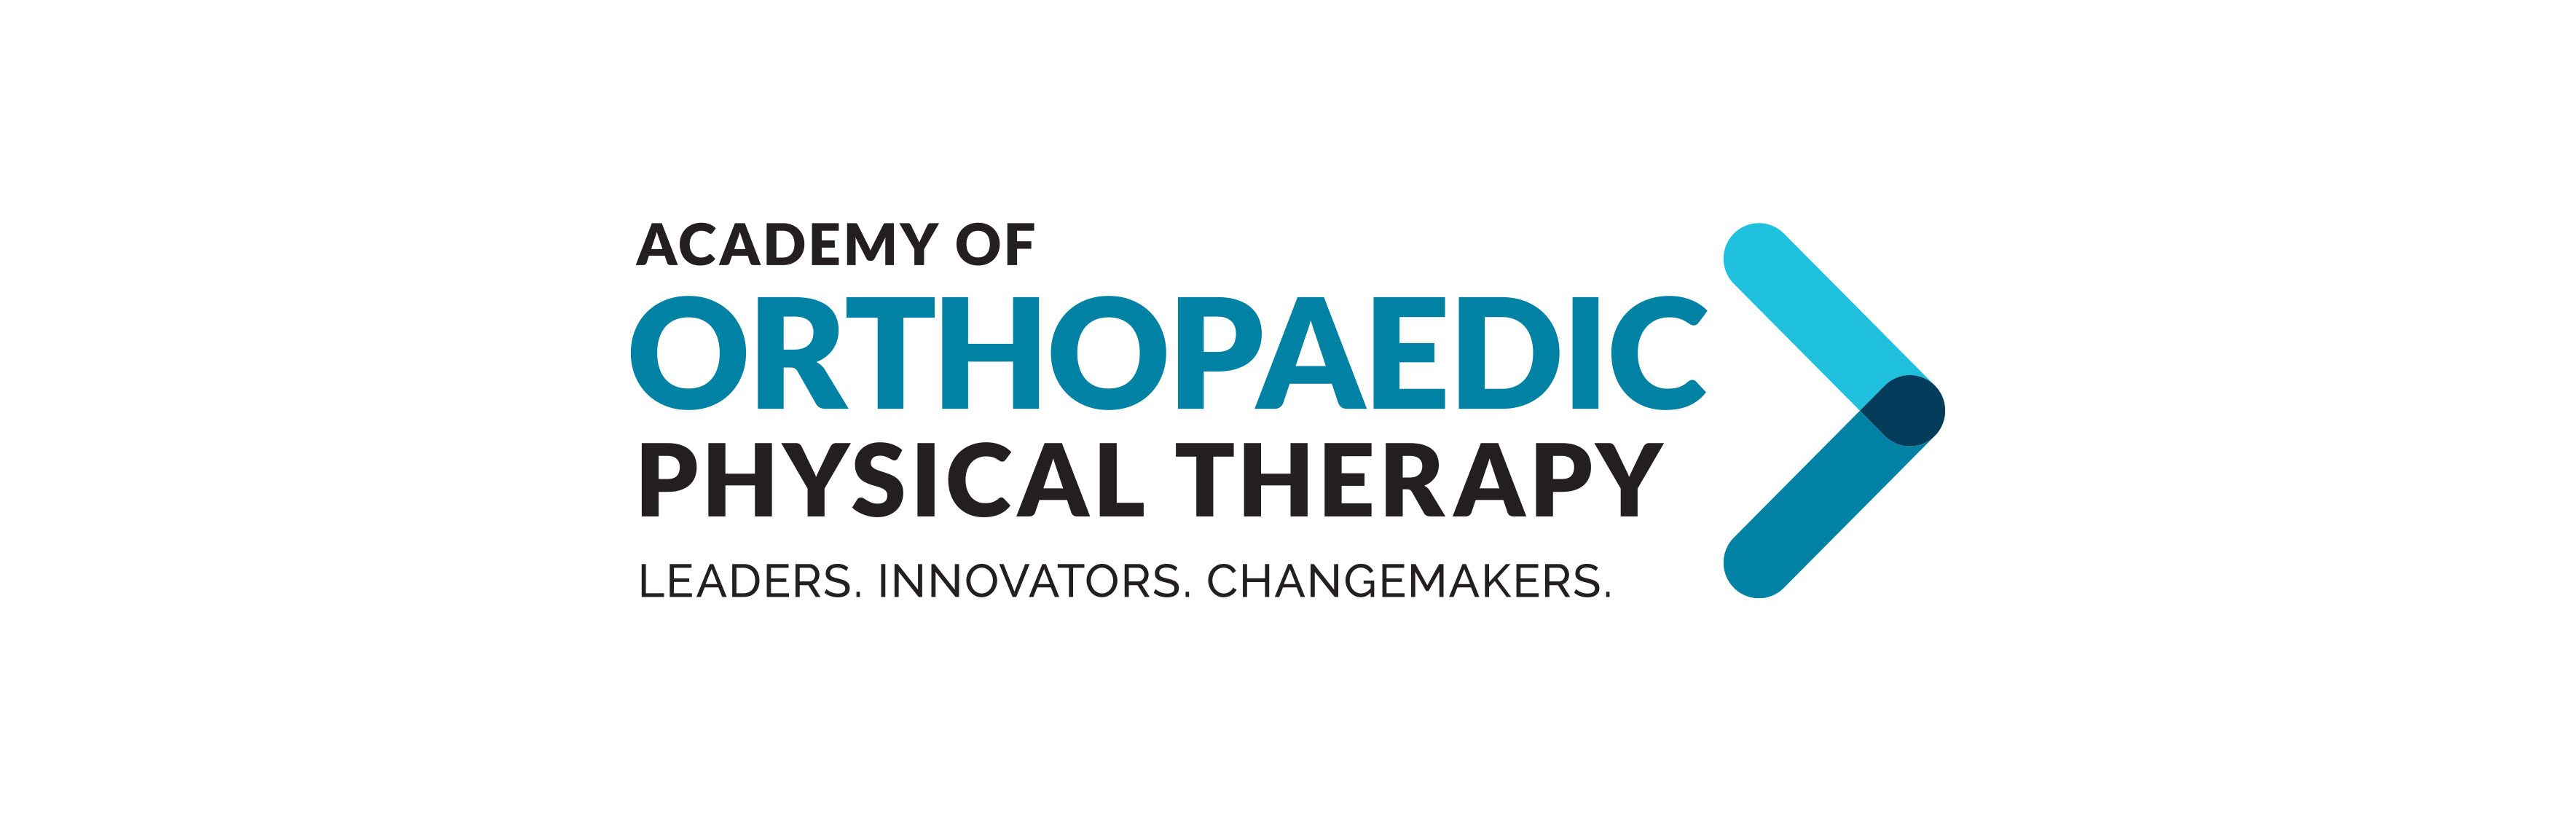 Academy of Orthopaedic Physical Therapy color logo created by Vendi, including the AOPT tagline